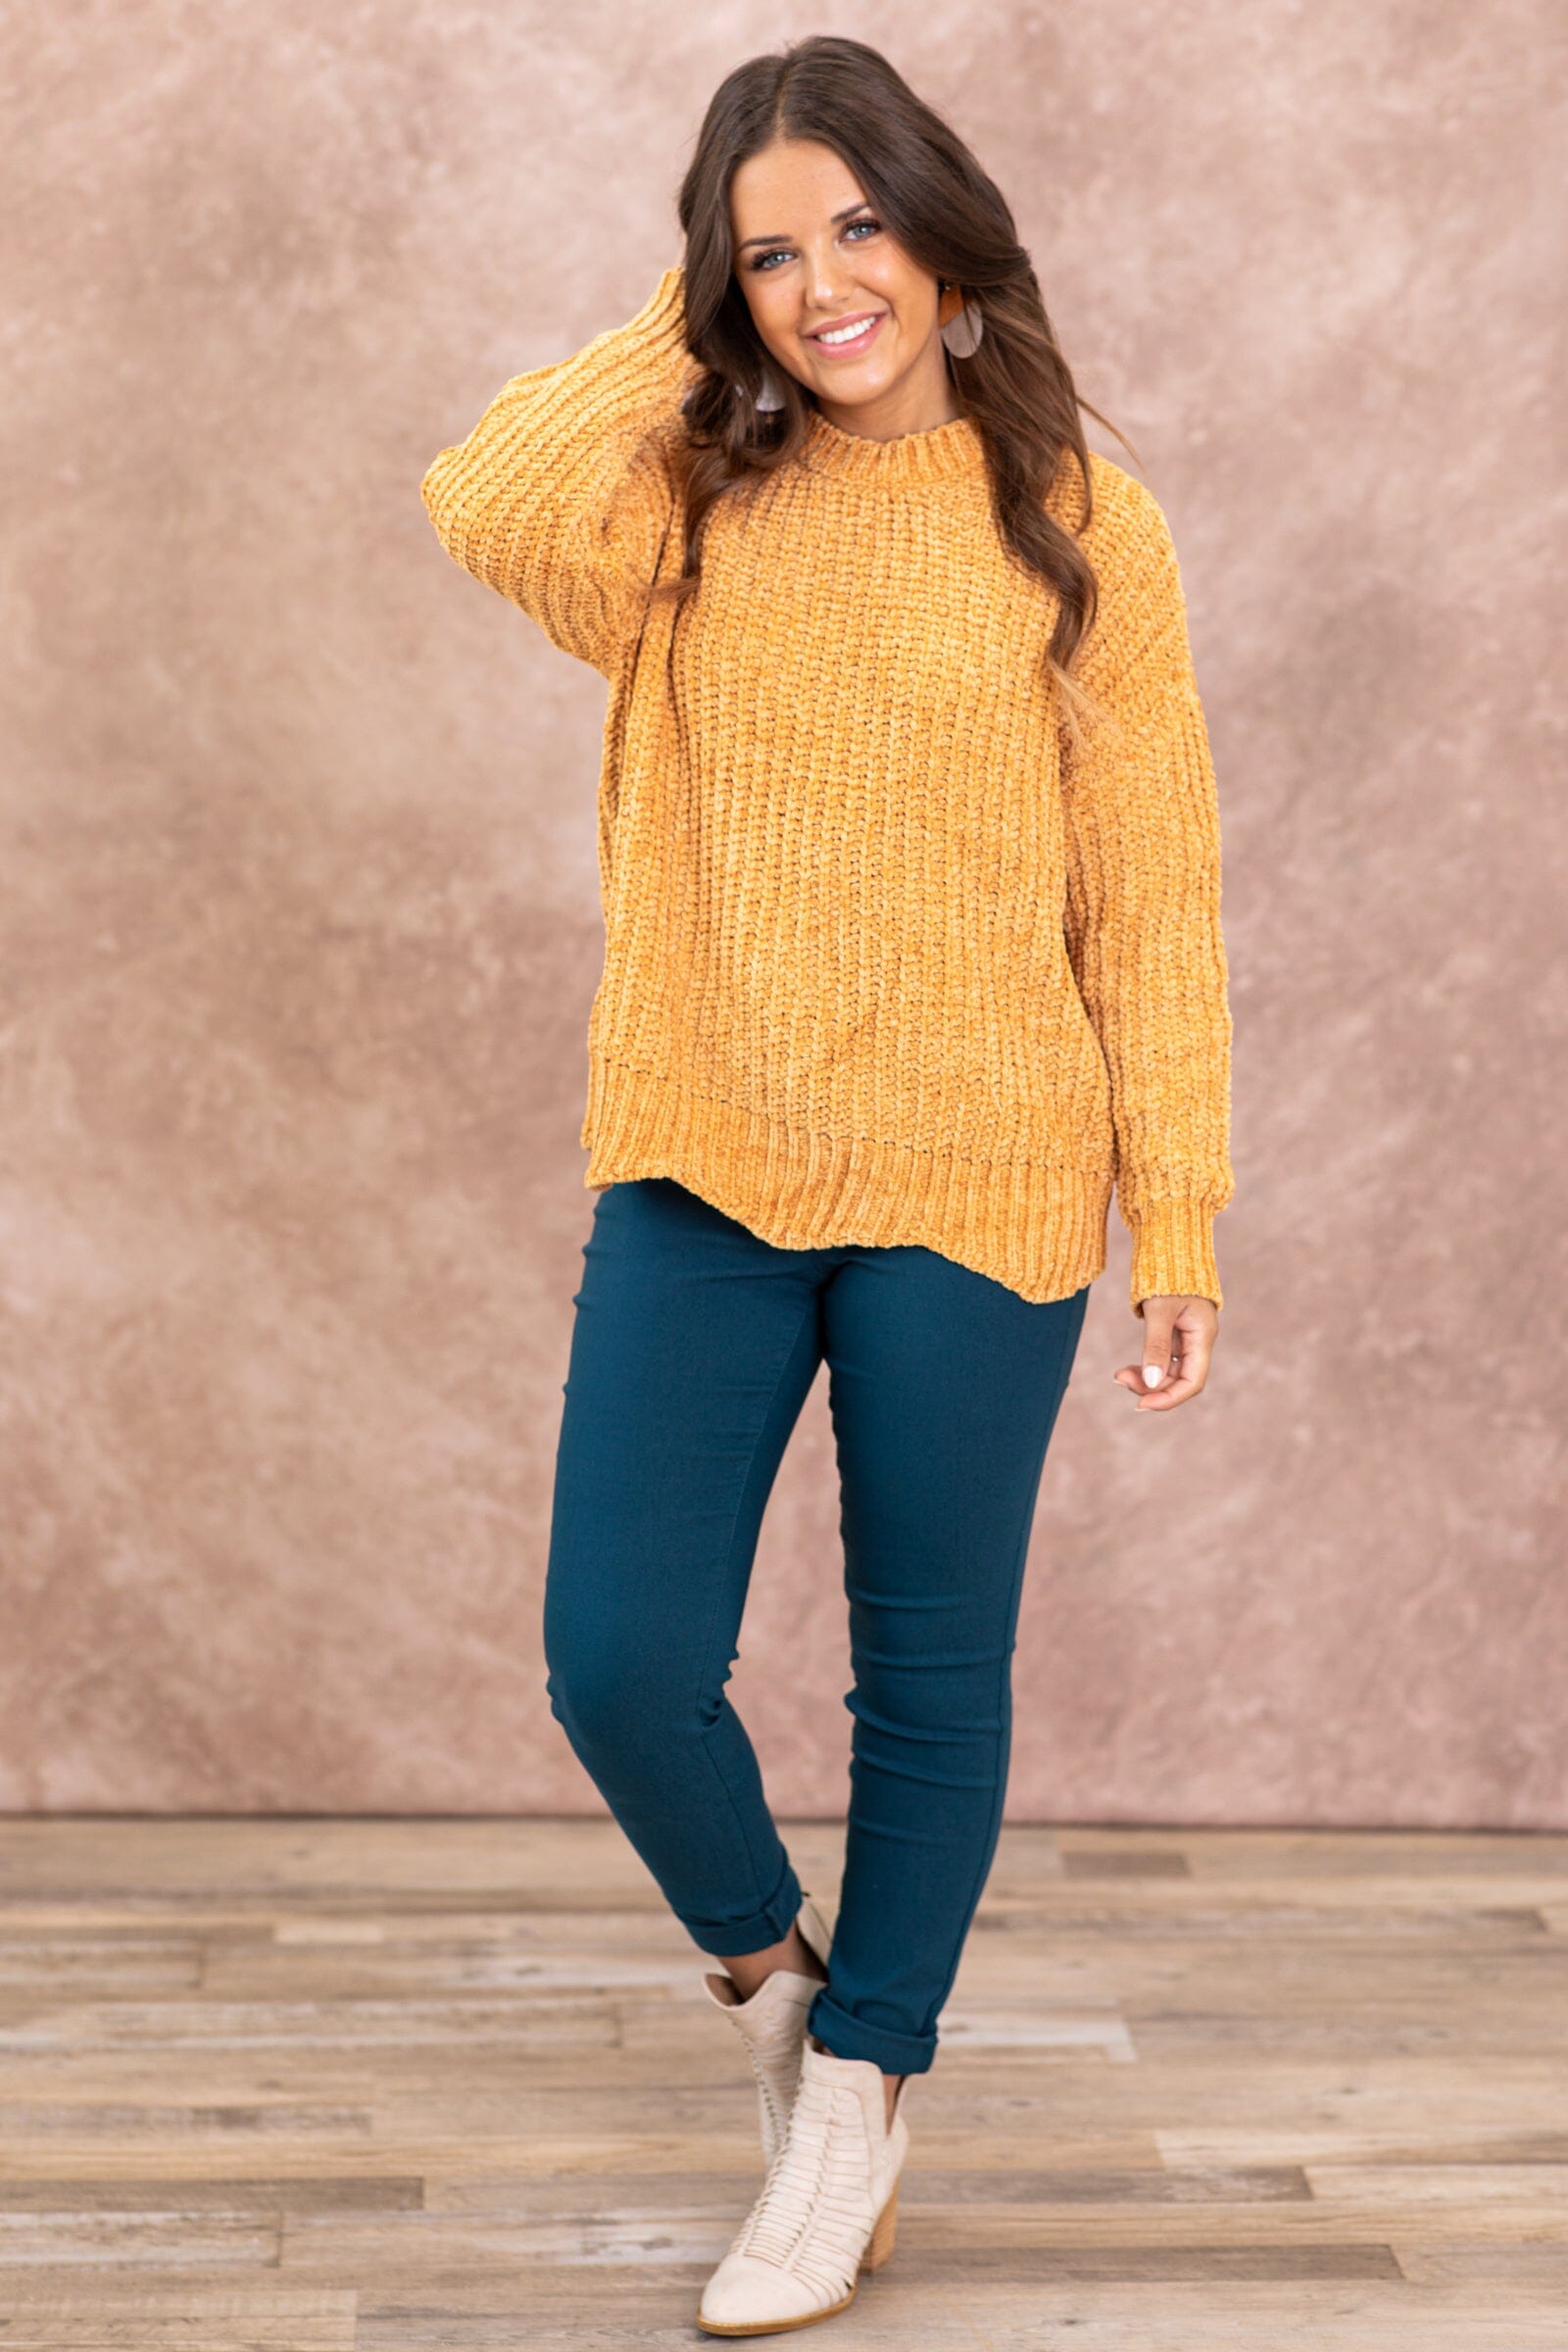 Copper Ribbed Sweater With Scallop Trim - Filly Flair